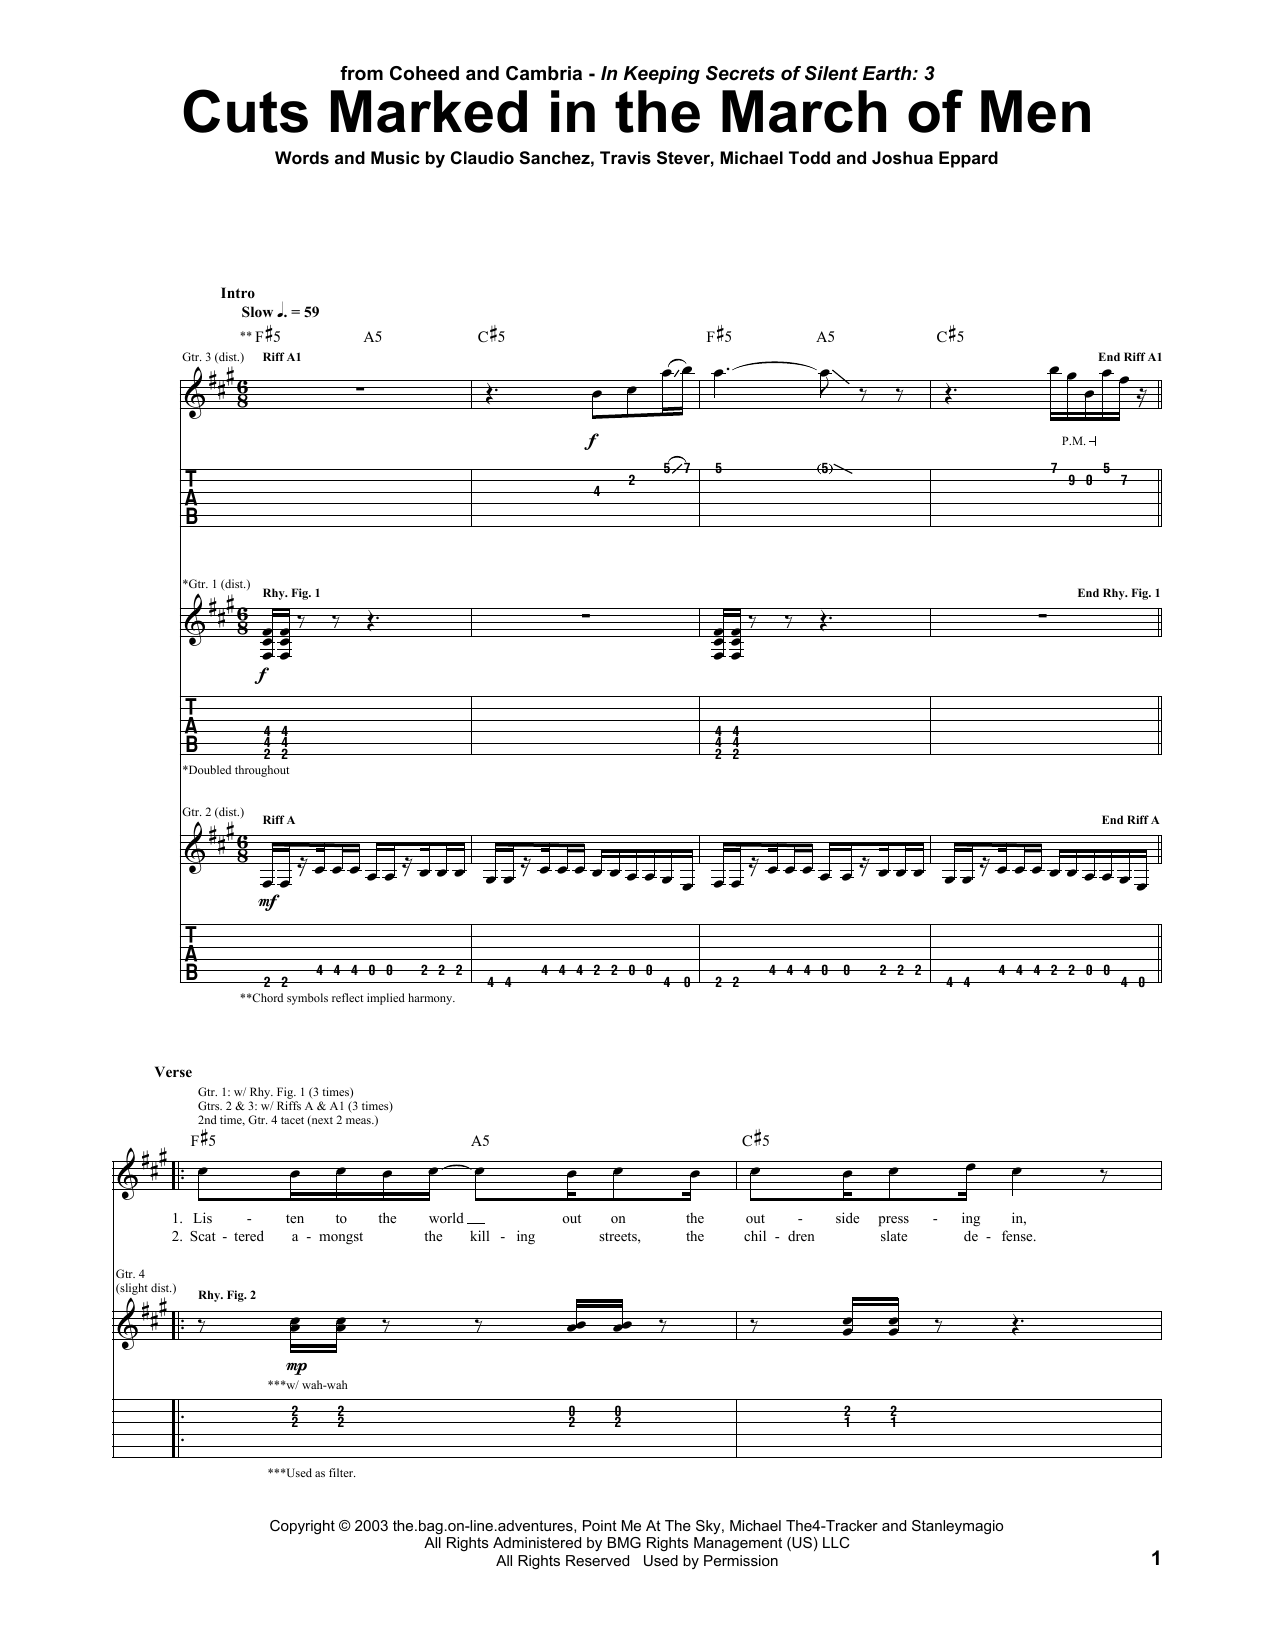 Download Coheed And Cambria Cuts Marked In The March Of Men Sheet Music